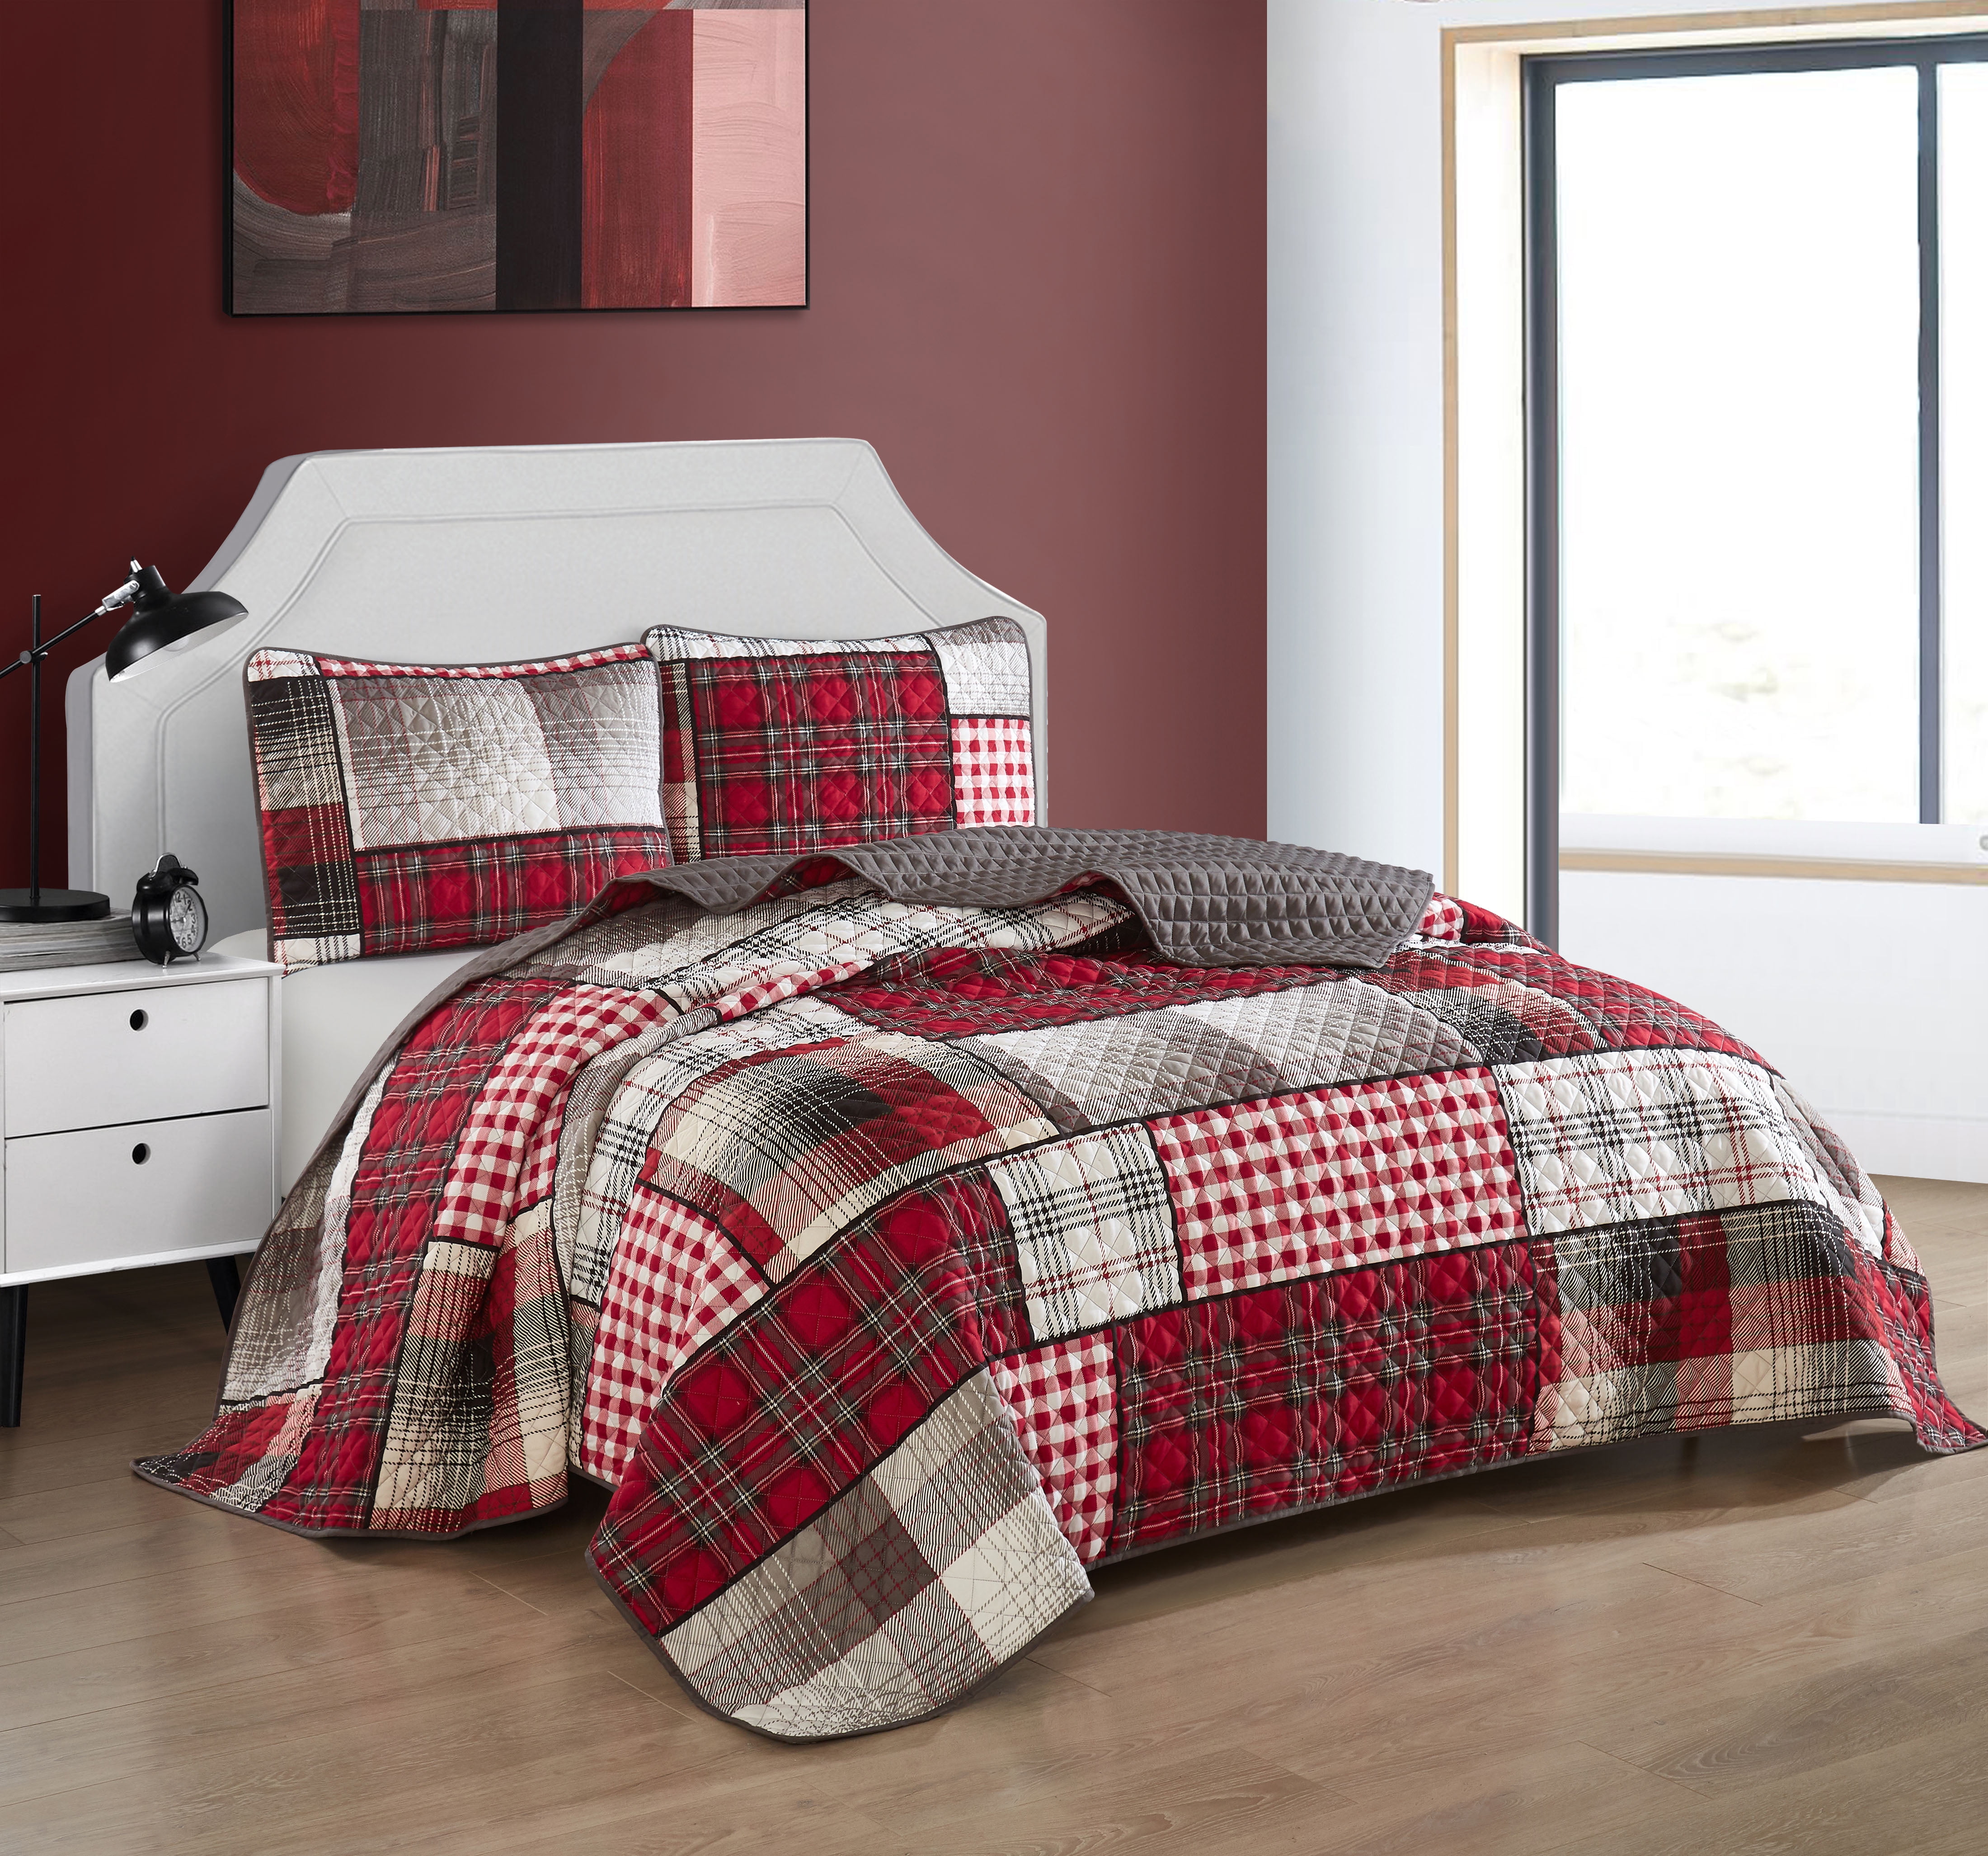 Details about   NEW ~ COZY COUNTRY LODGE LOG CABIN RED BROWN IVORY BEIGE GREY PLAID QUILT SET 